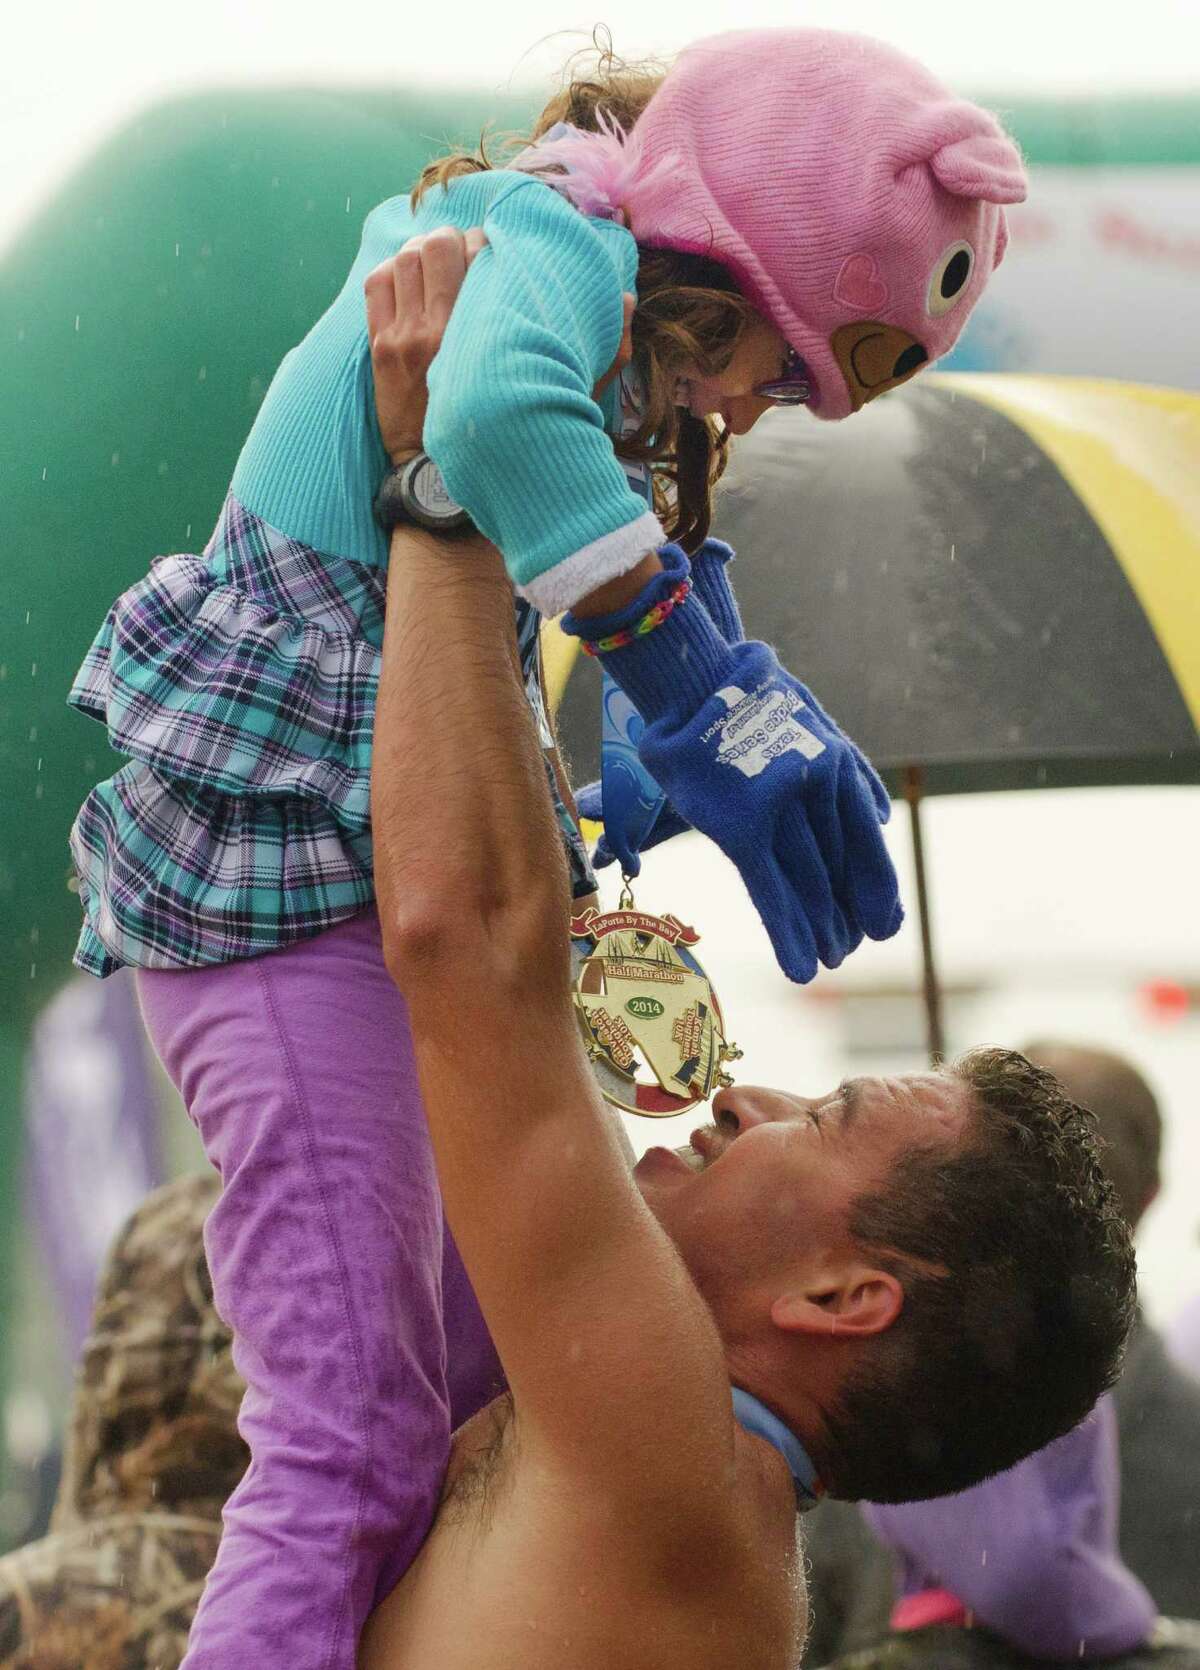 Iram Leon lifts up his daughter Kiana, 7, in celebration after finishing the La Porte by the Bay Half Marathon in 1 hour, 25 minutes on Sunday.﻿﻿﻿